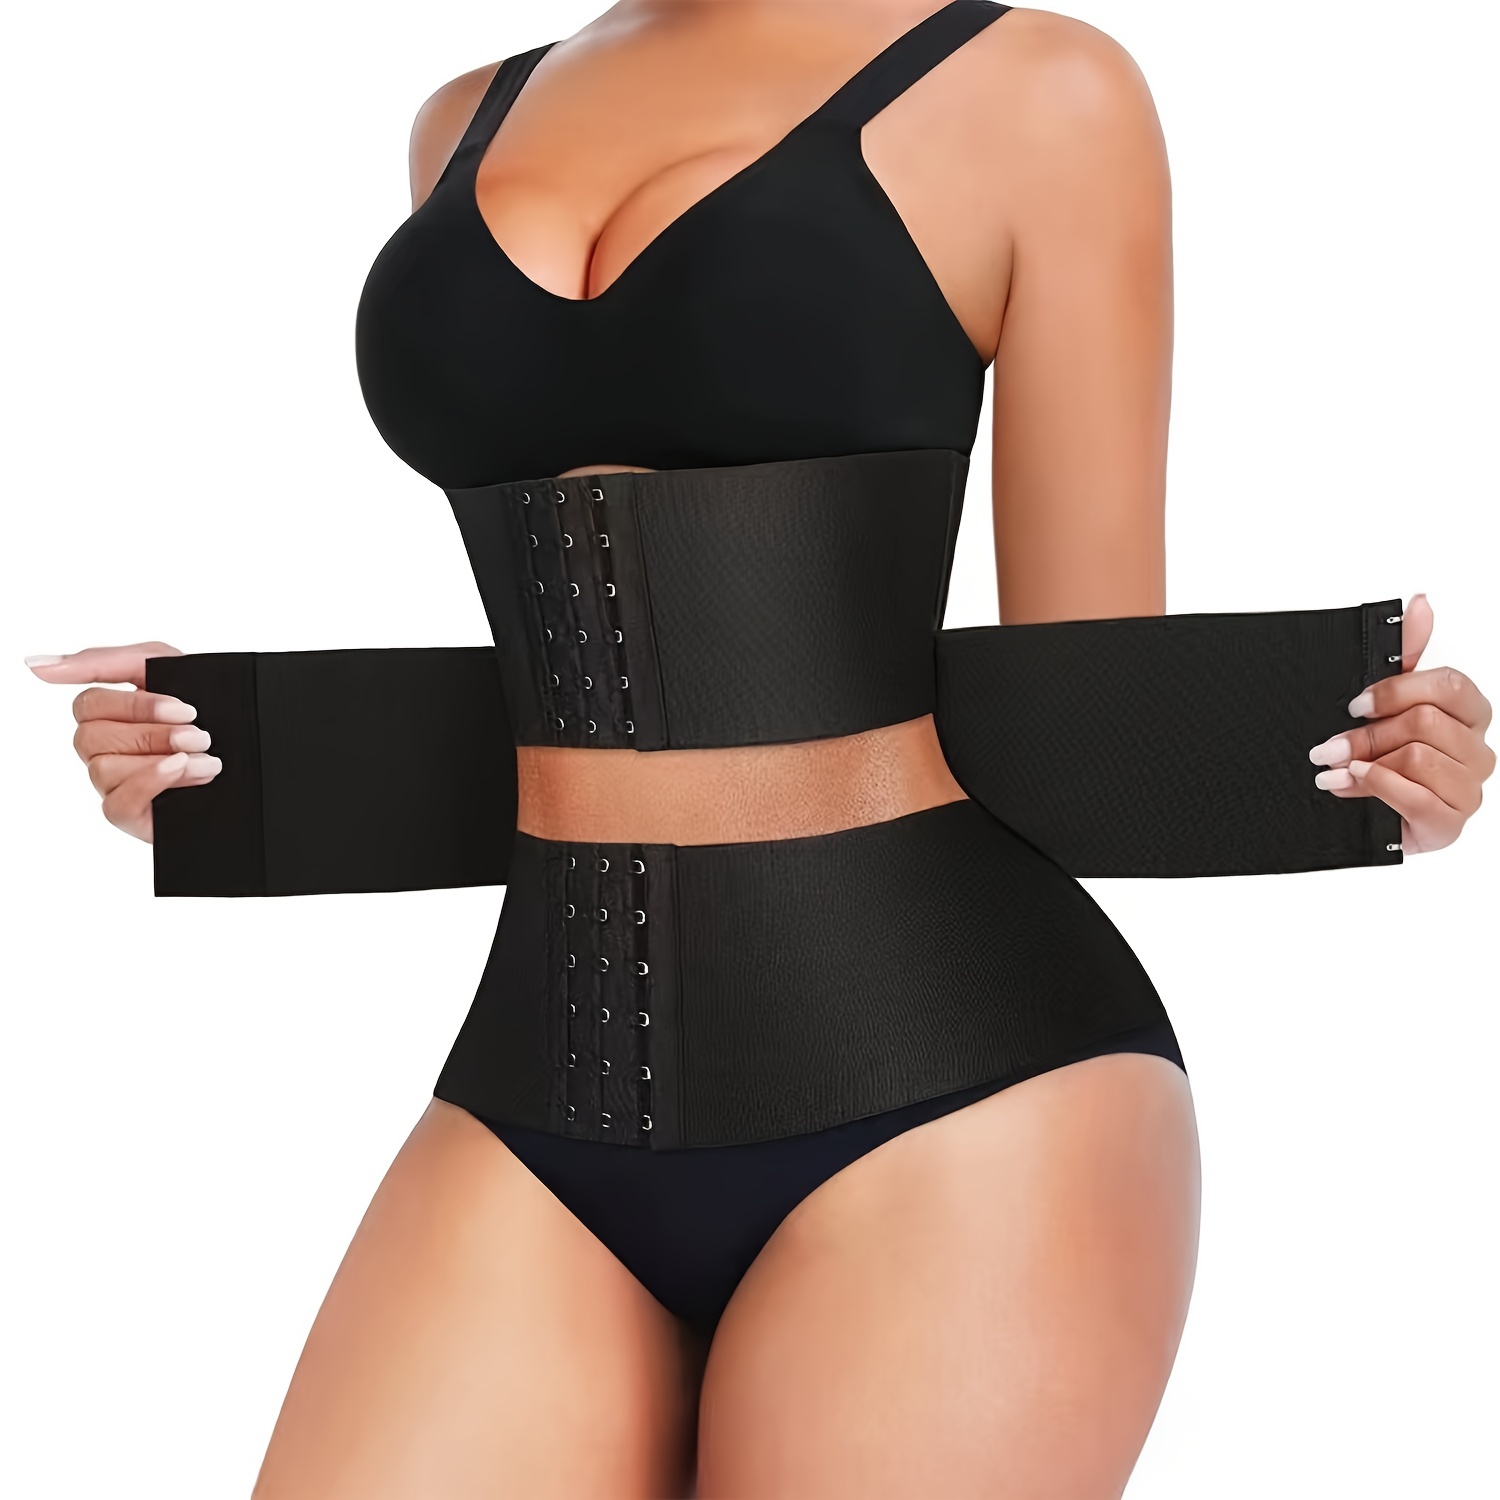 Women's Sports Waist Trainer Belt, Workout Crop Top Body Shaper With  Breathable Hollow Out Design, Black